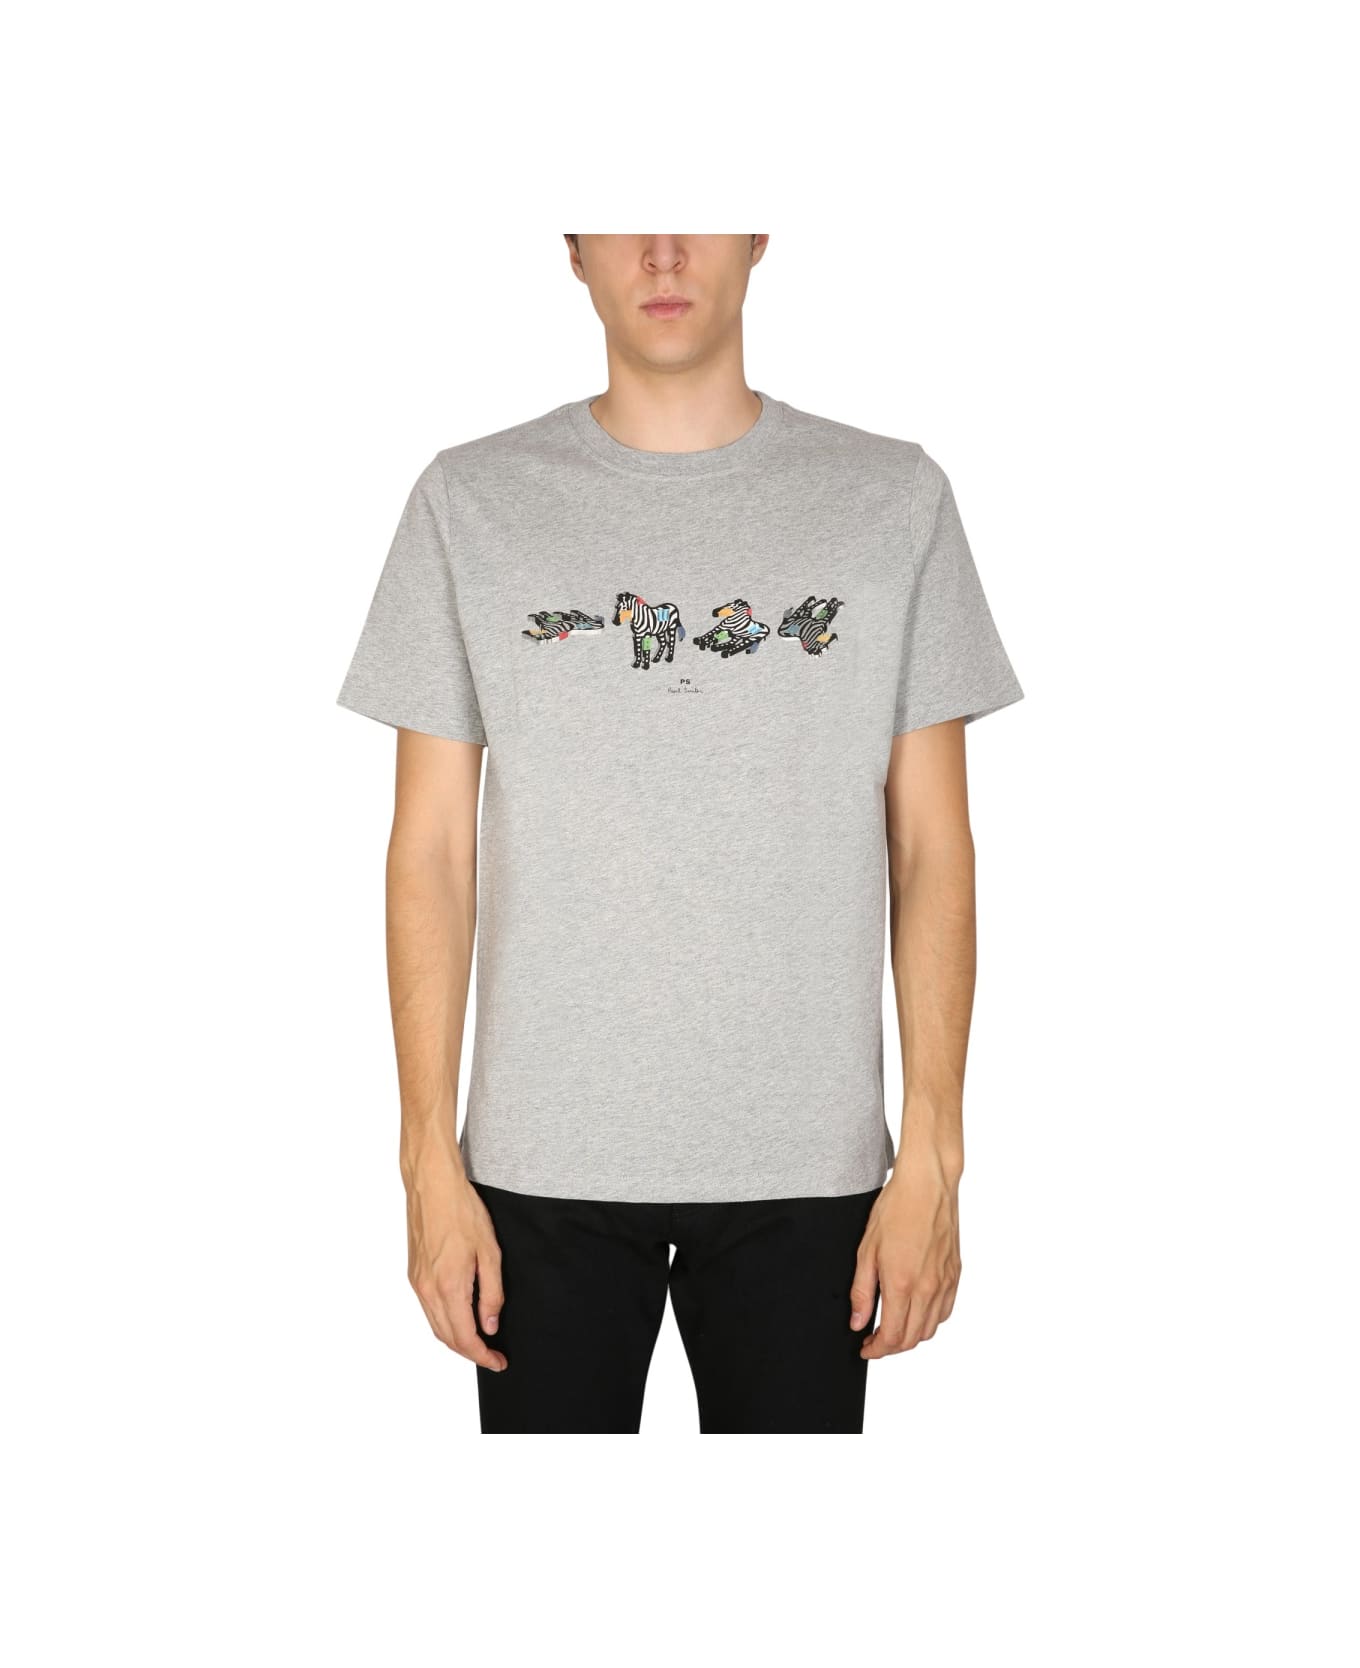 PS by Paul Smith Crewneck T-shirt - GREY